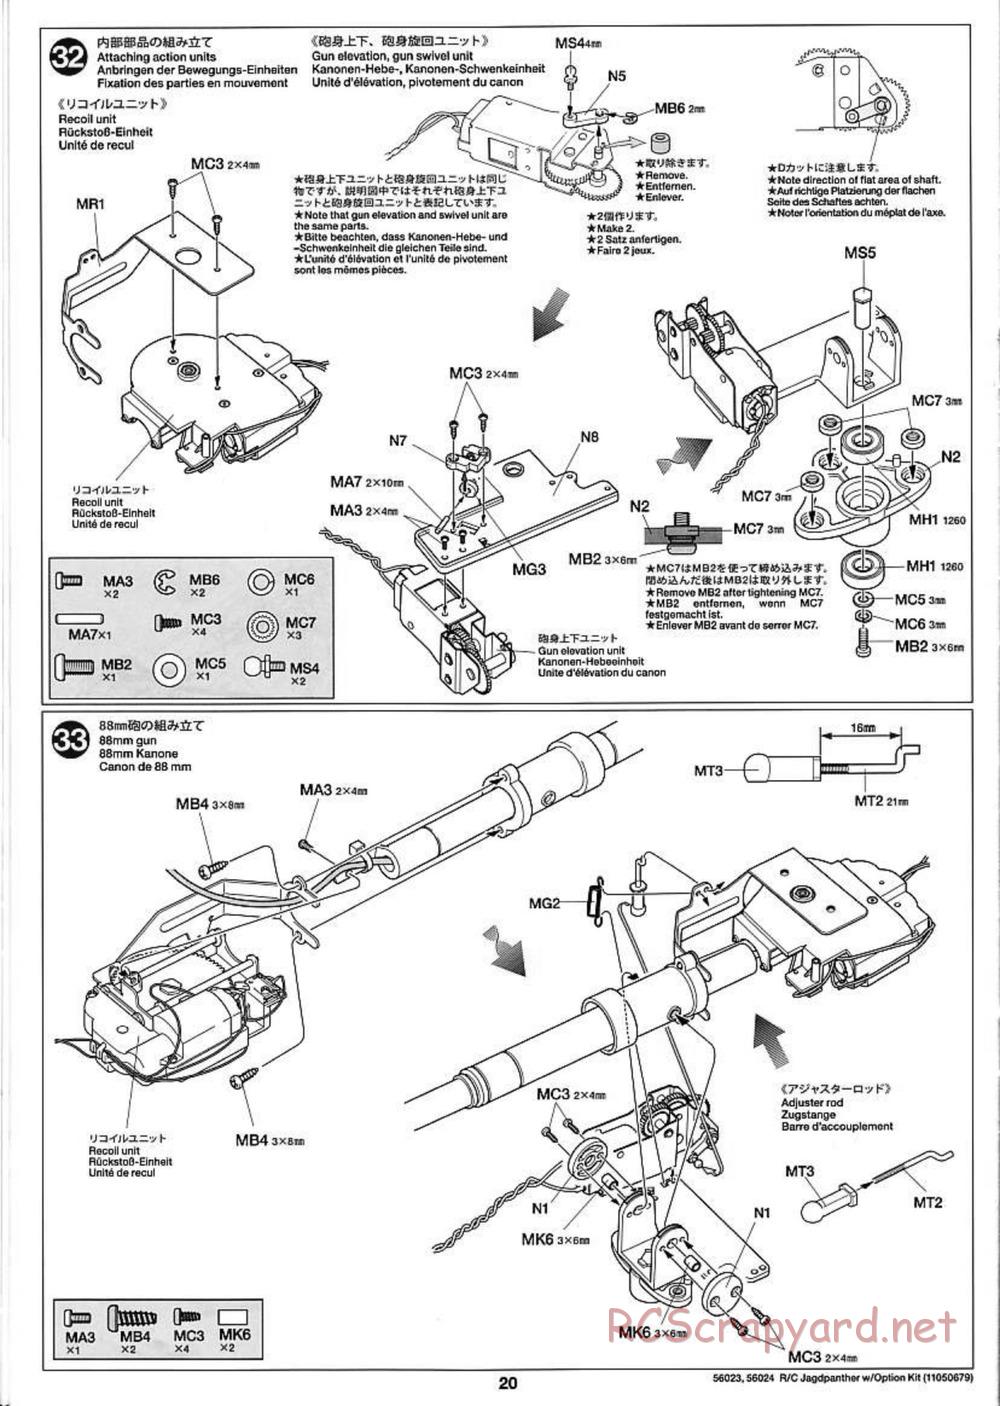 Tamiya - Jagdpanther - 1/16 Scale Chassis - Manual - Page 20